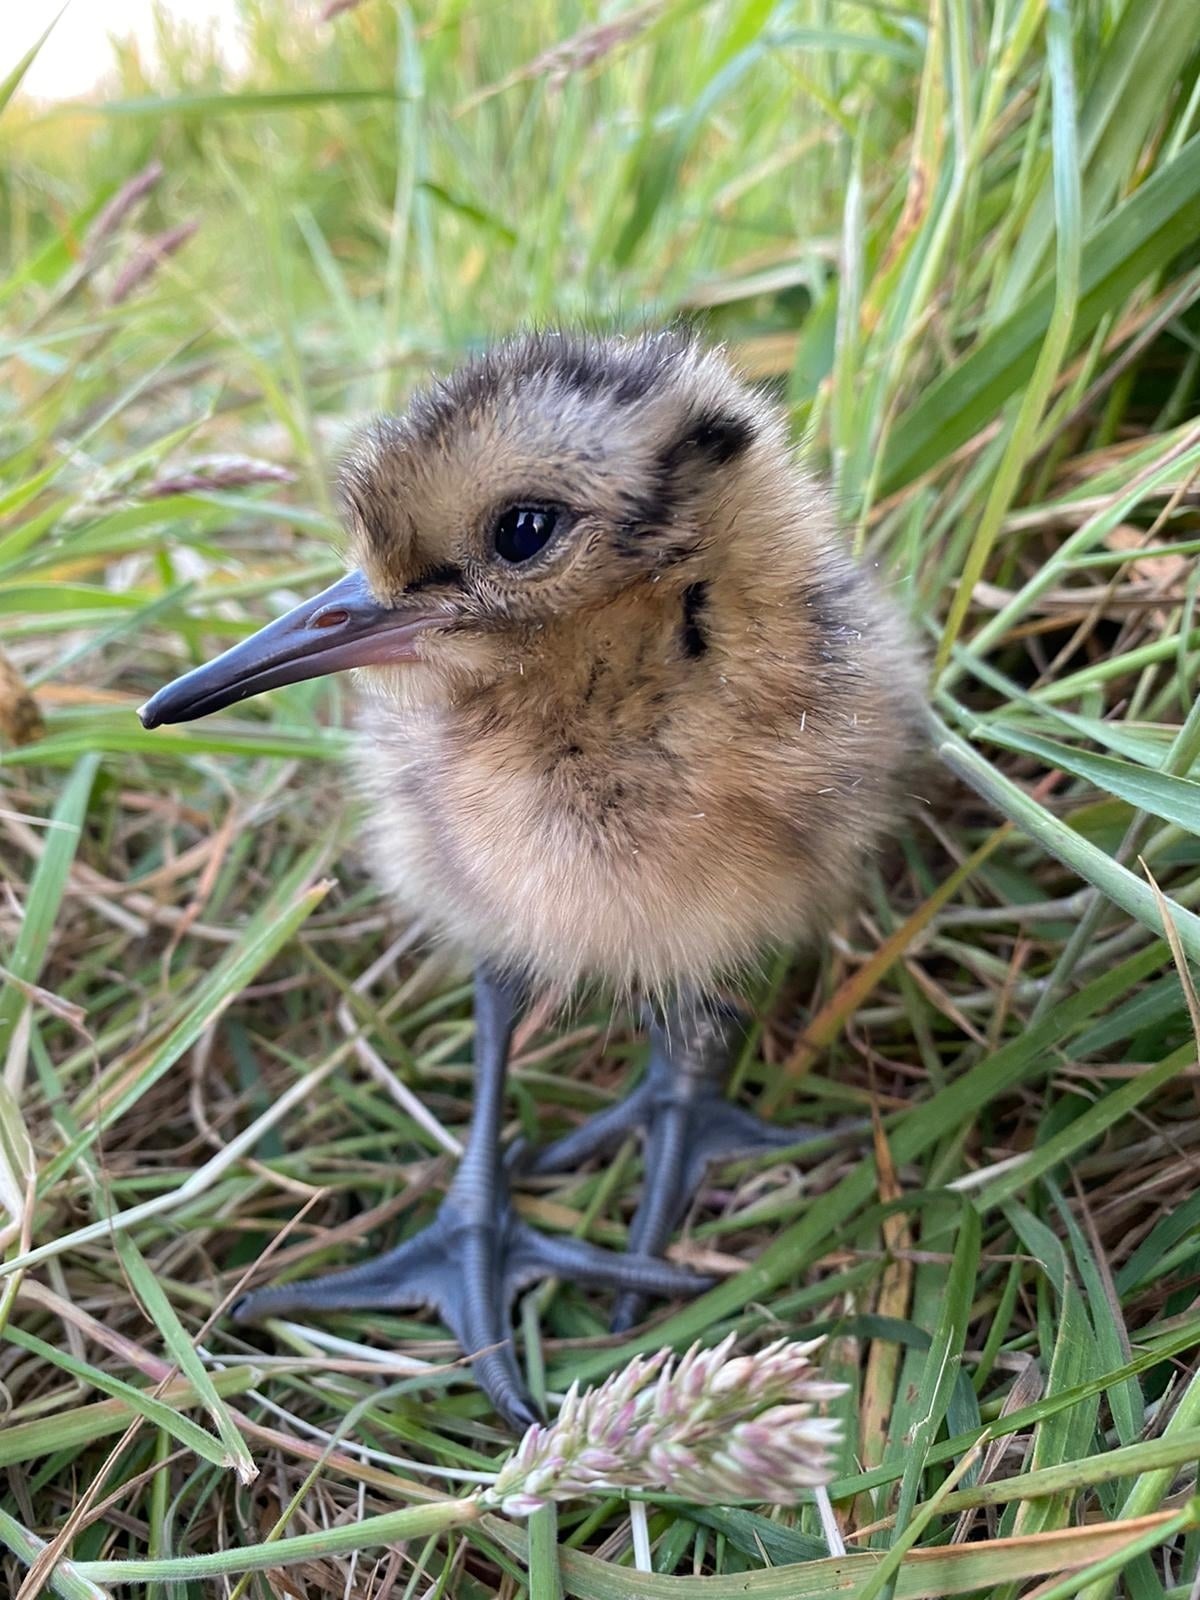 A baby curlew (Picture: Lough Neagh Landscape)